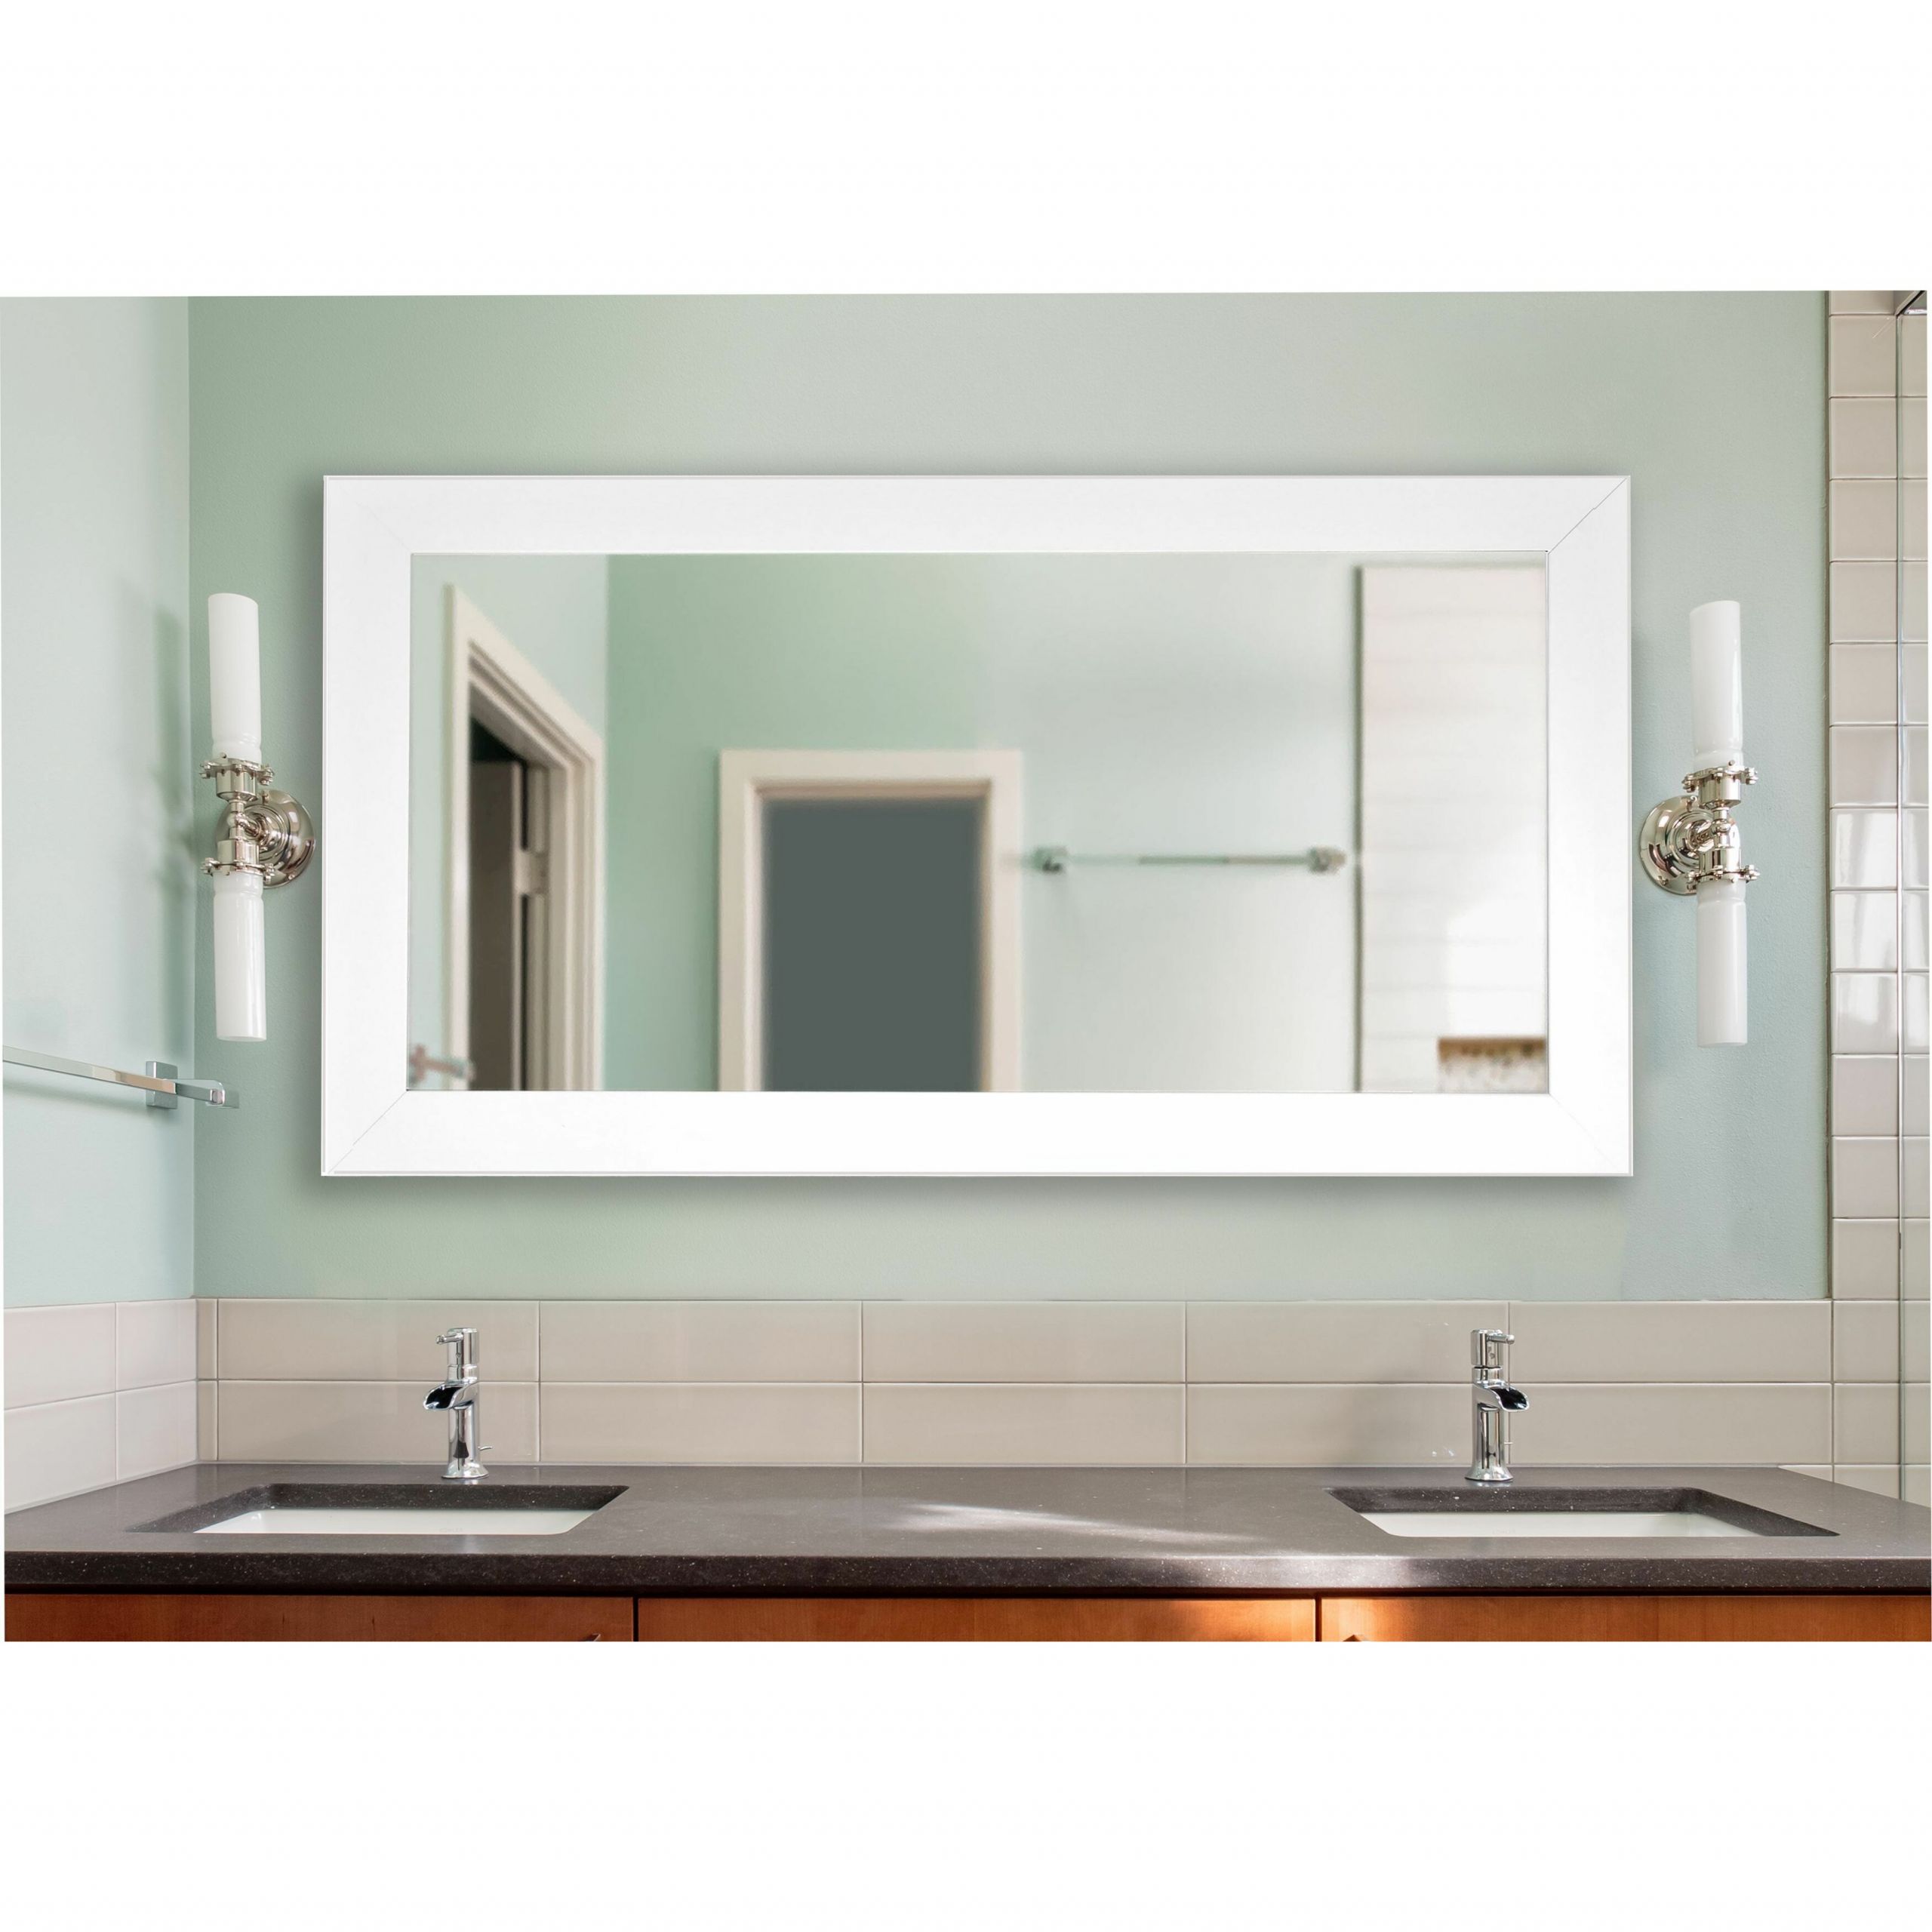 Double Wide Bathroom Mirrors
 Rayne Mirrors Double Wide Vanity Wall Mirror & Reviews